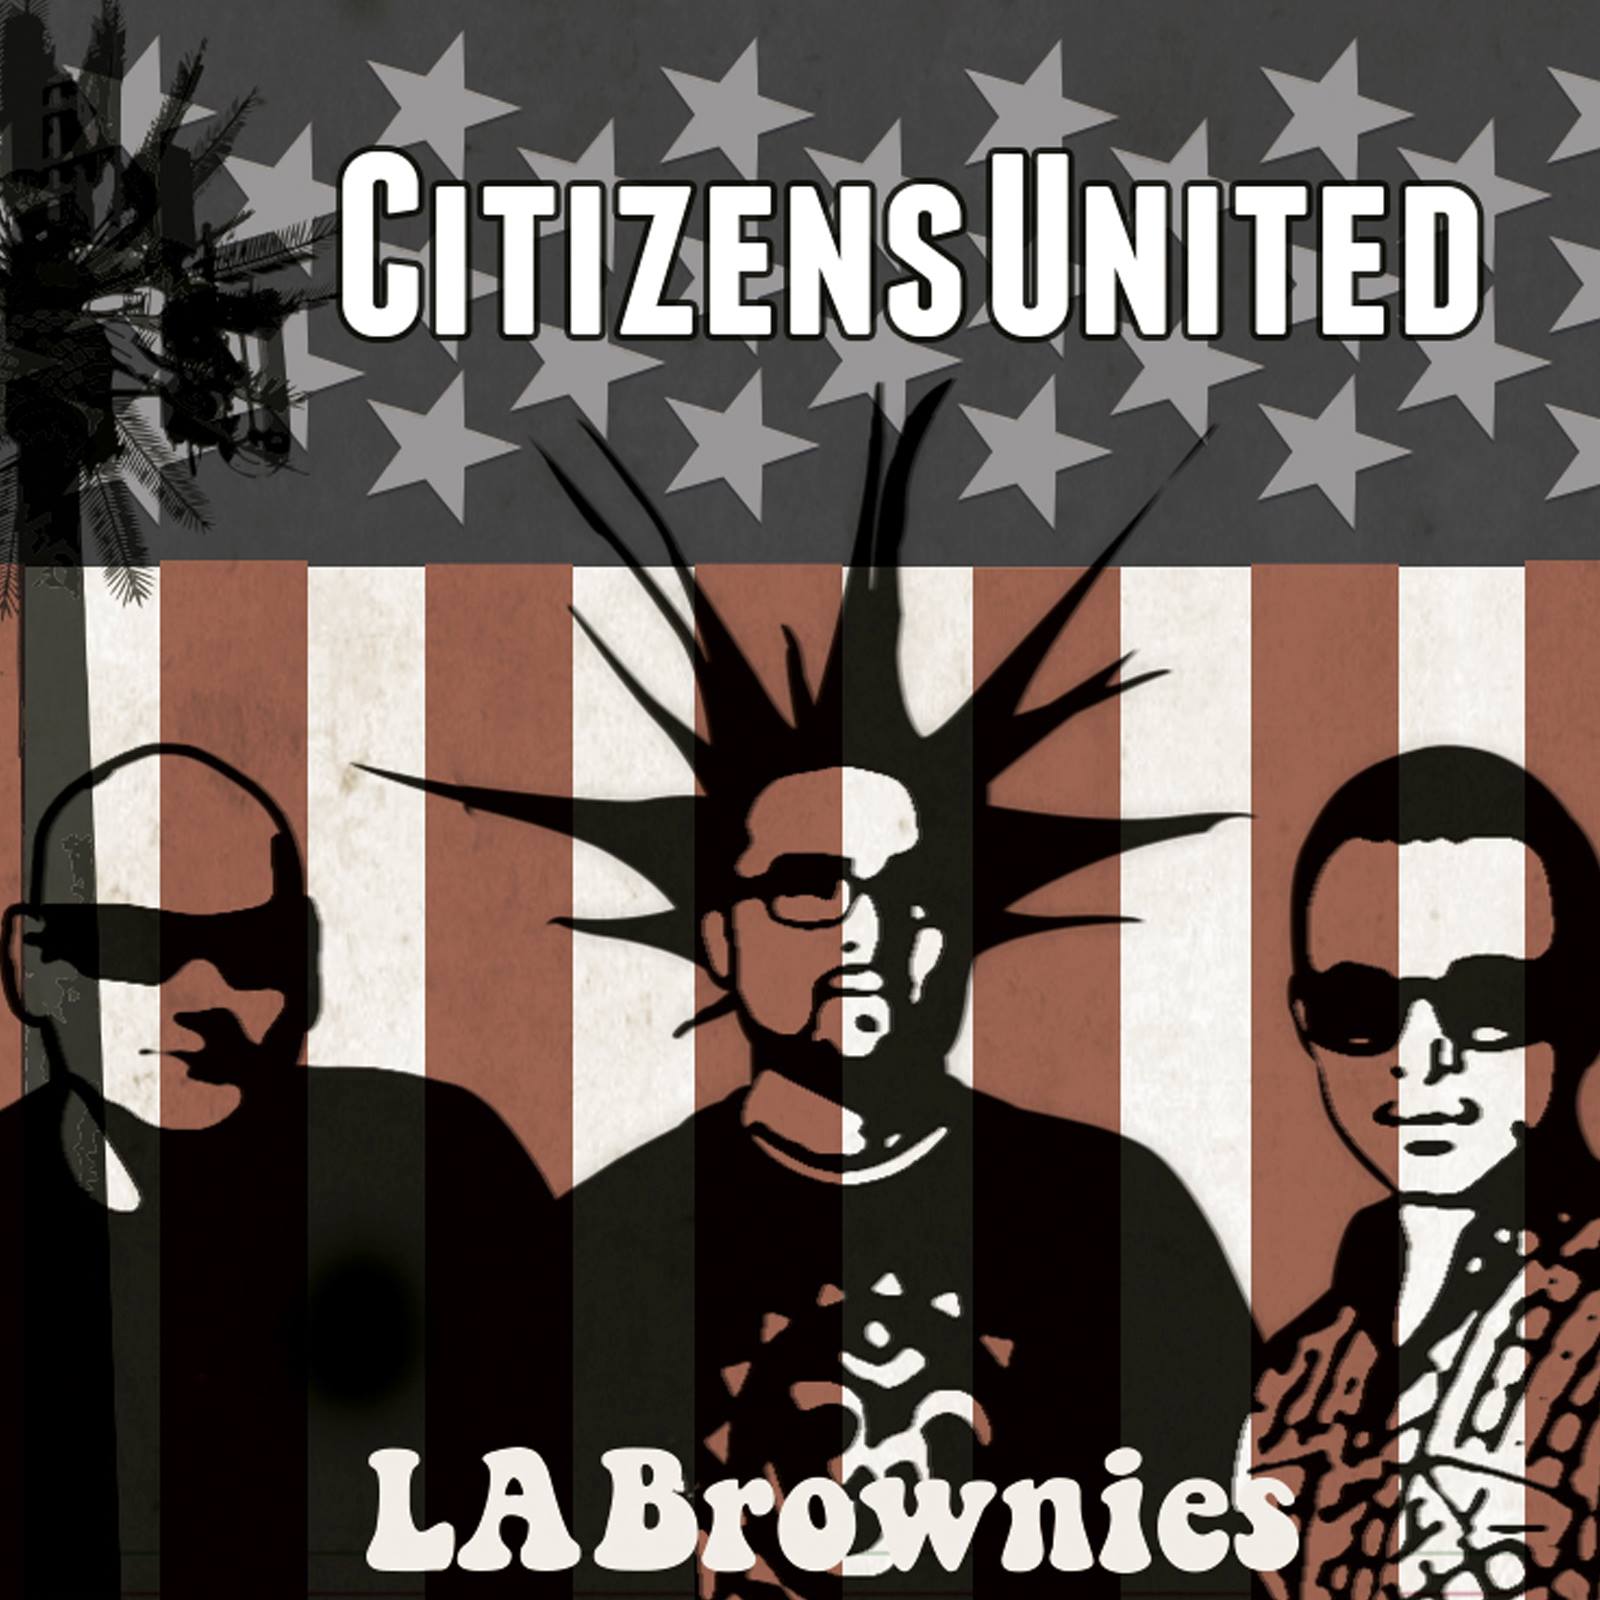  L.A. Brownies – Citizens United